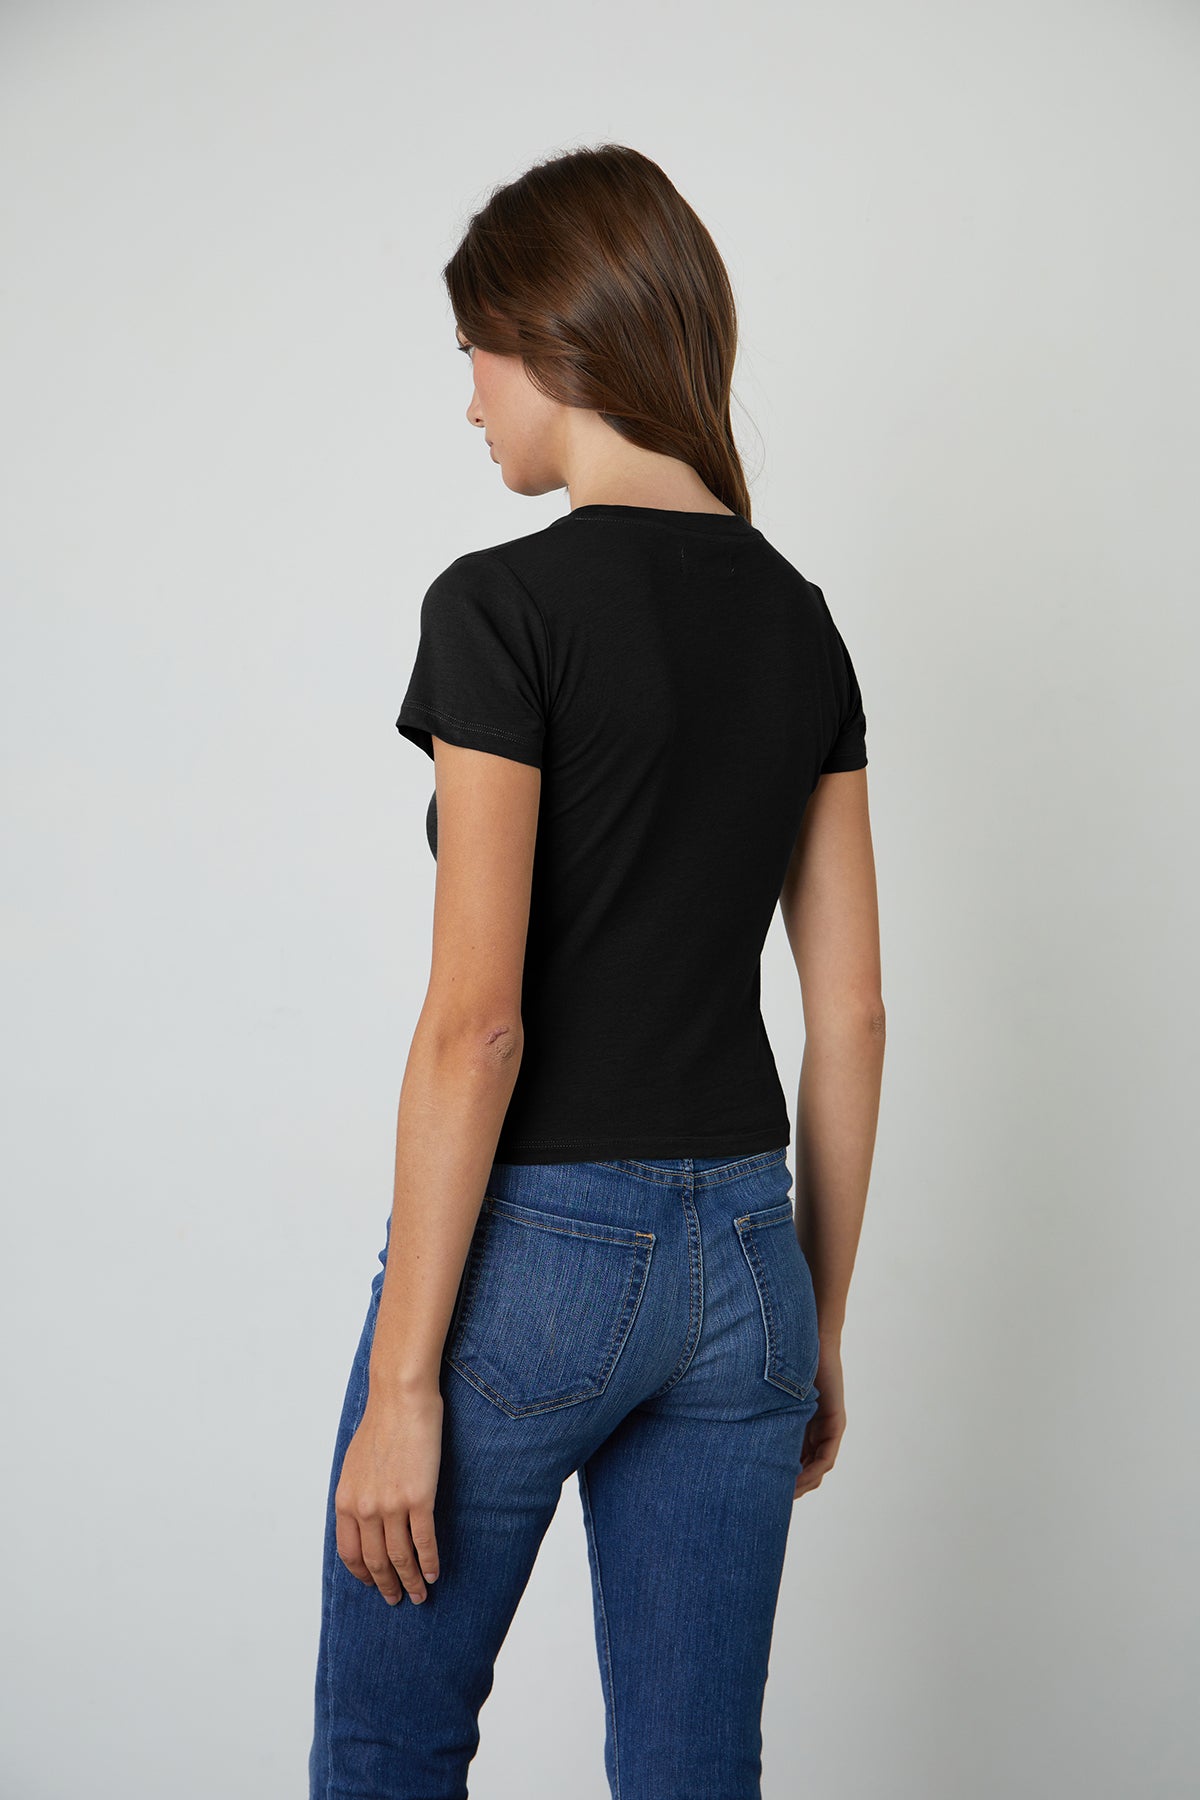 The woman is seen from behind, sporting jeans and a black t-shirt made of whisper cotton knit fabric, perfect for warm-weather, specifically the NINA CROPPED CREW NECK TEE from Velvet by Graham & Spencer.-35205515837633